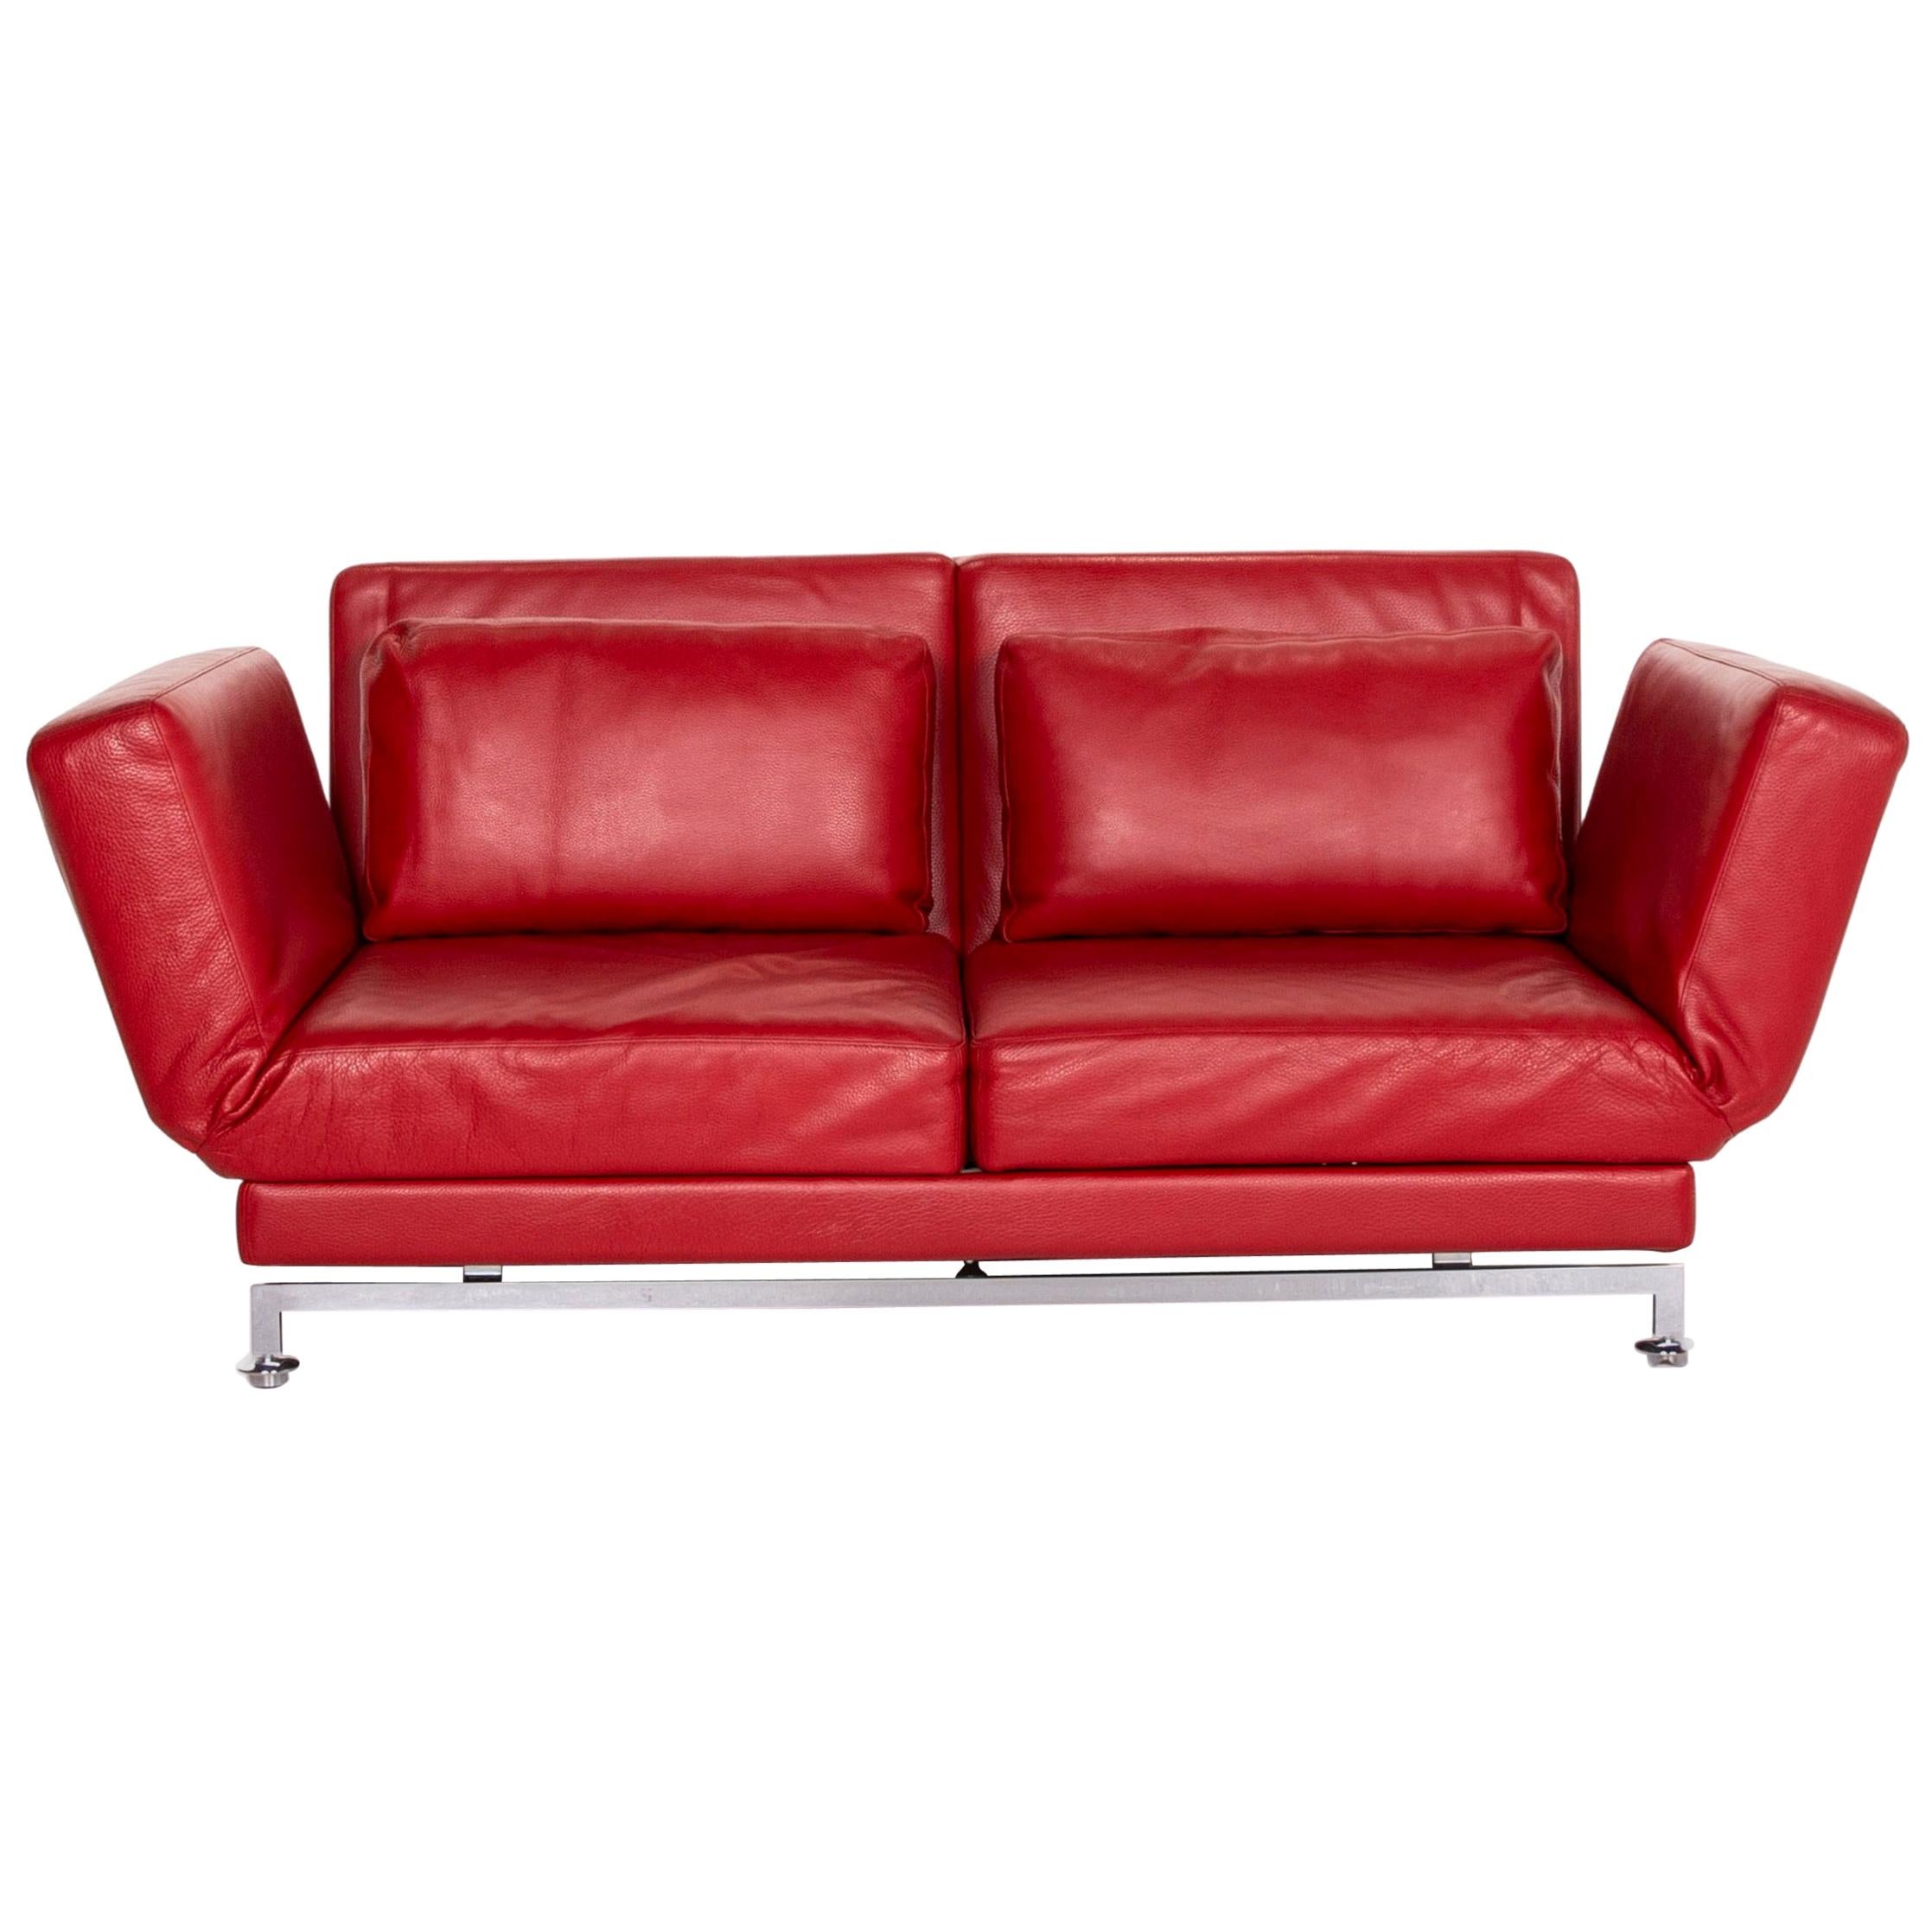 Brühl & Sippold Moule Leather Sofa Red Two-Seat Function Sofa Bed Sleep For Sale